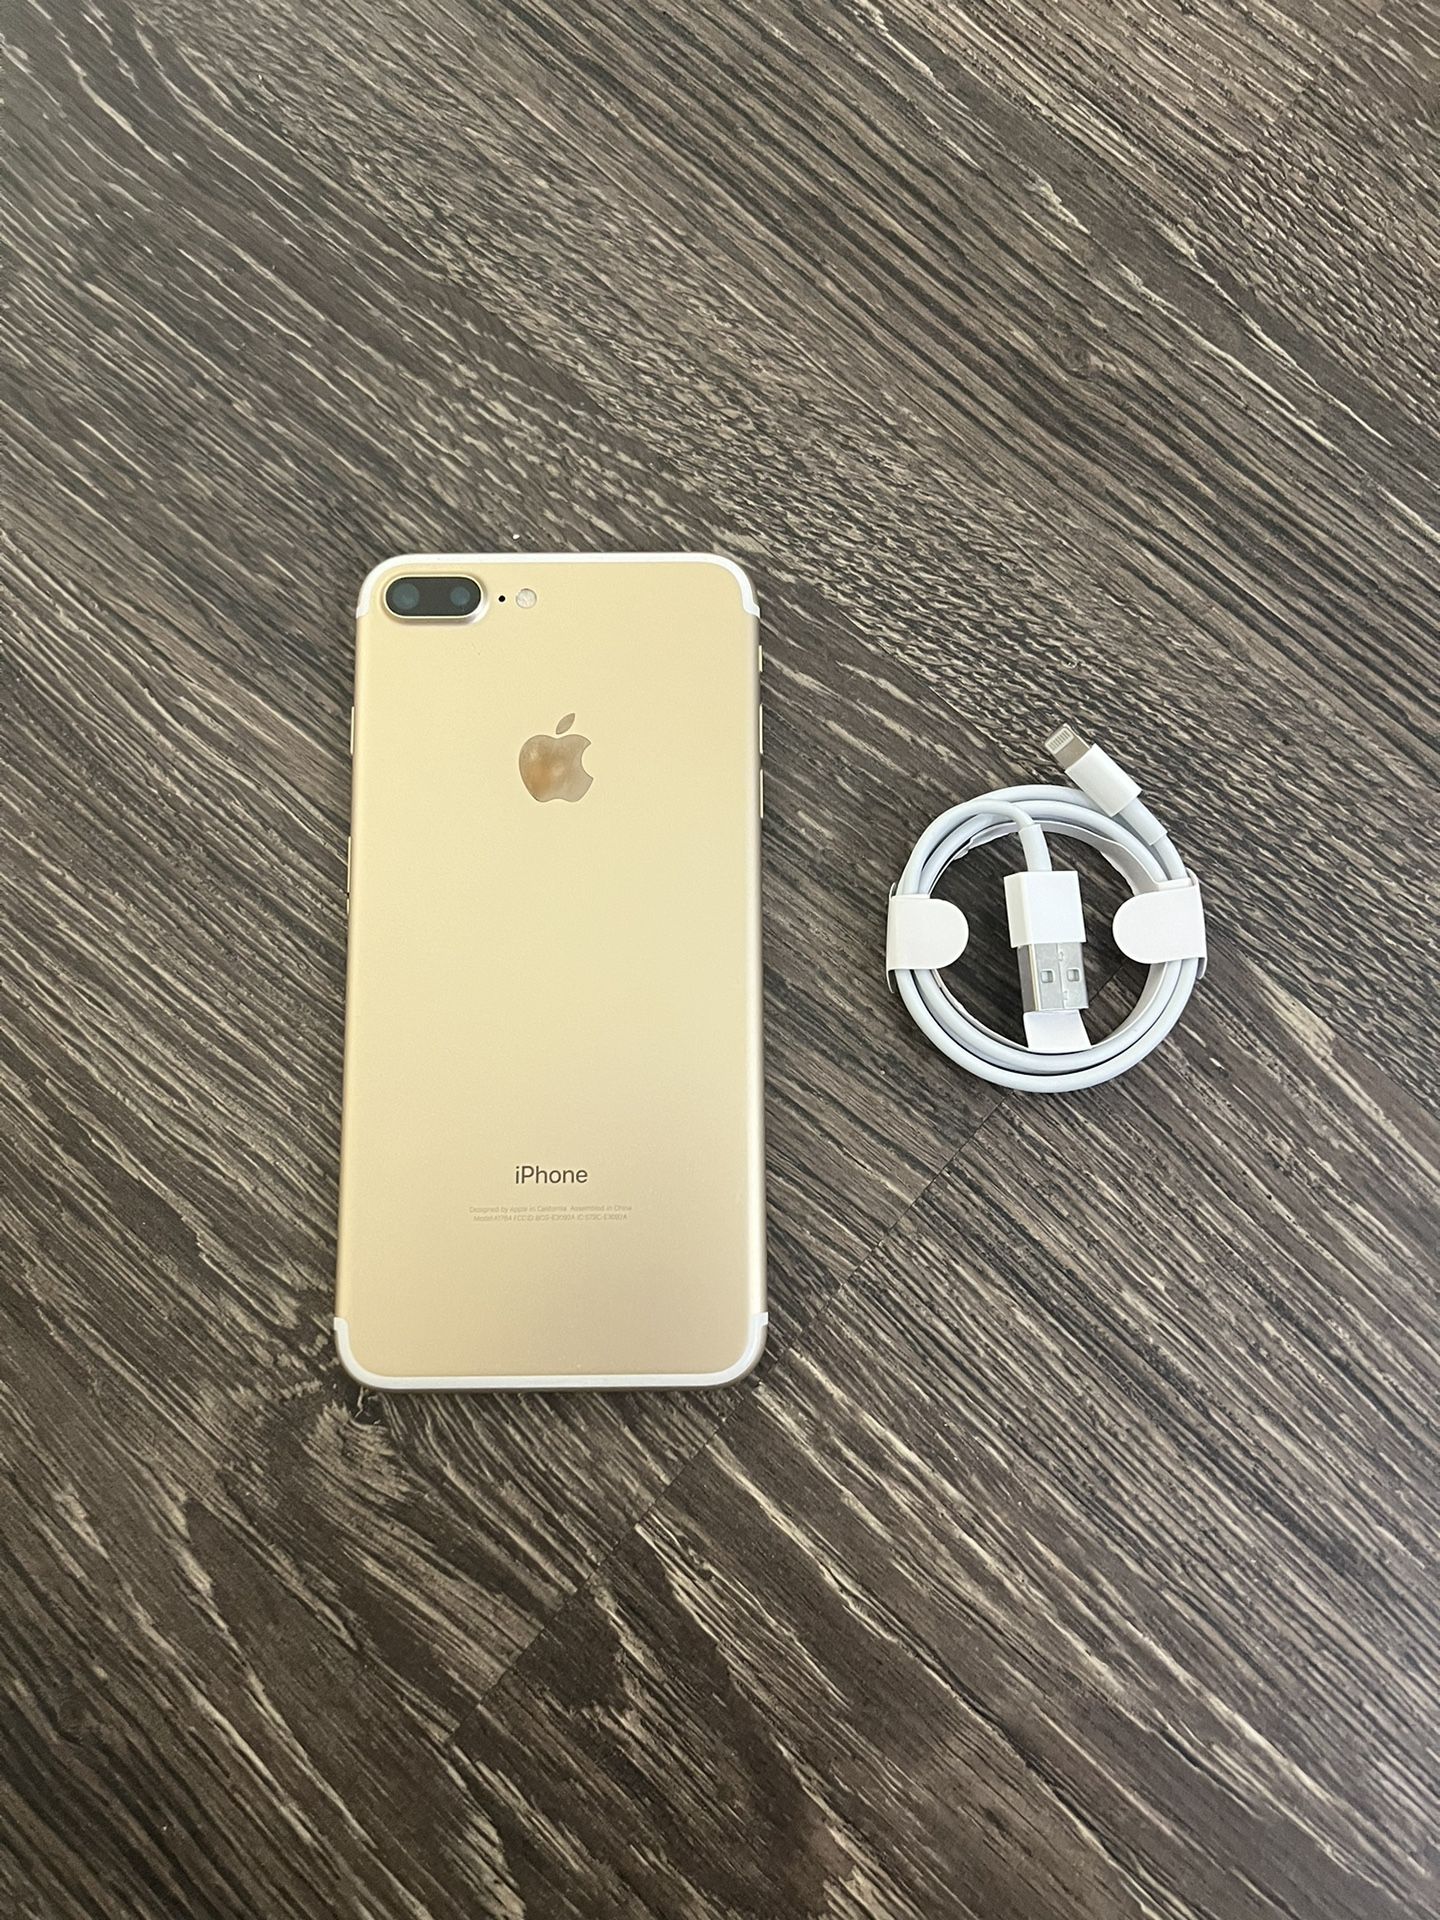 iPhone 7 Plus Gold UNLOCKED FOR ANY CARRIER!